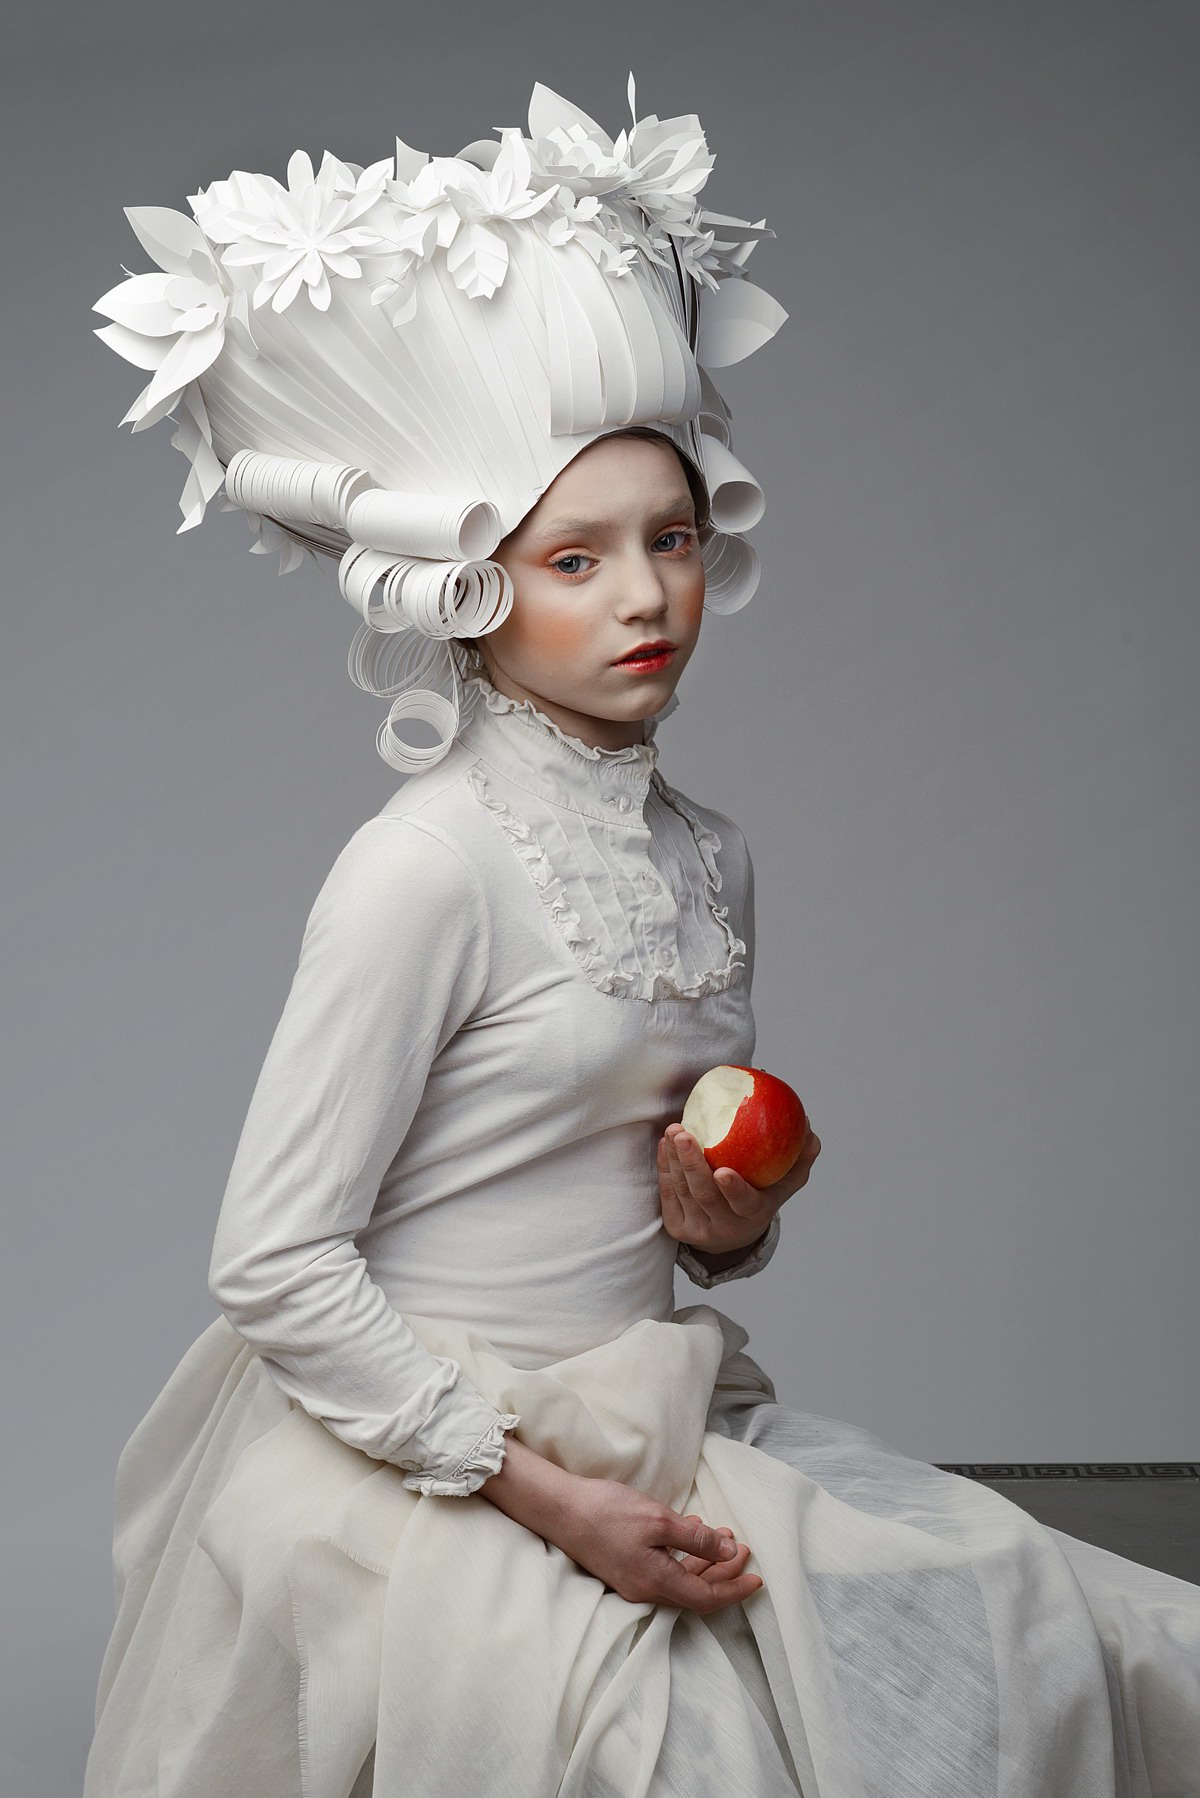 Baroque paper wigs on Behance